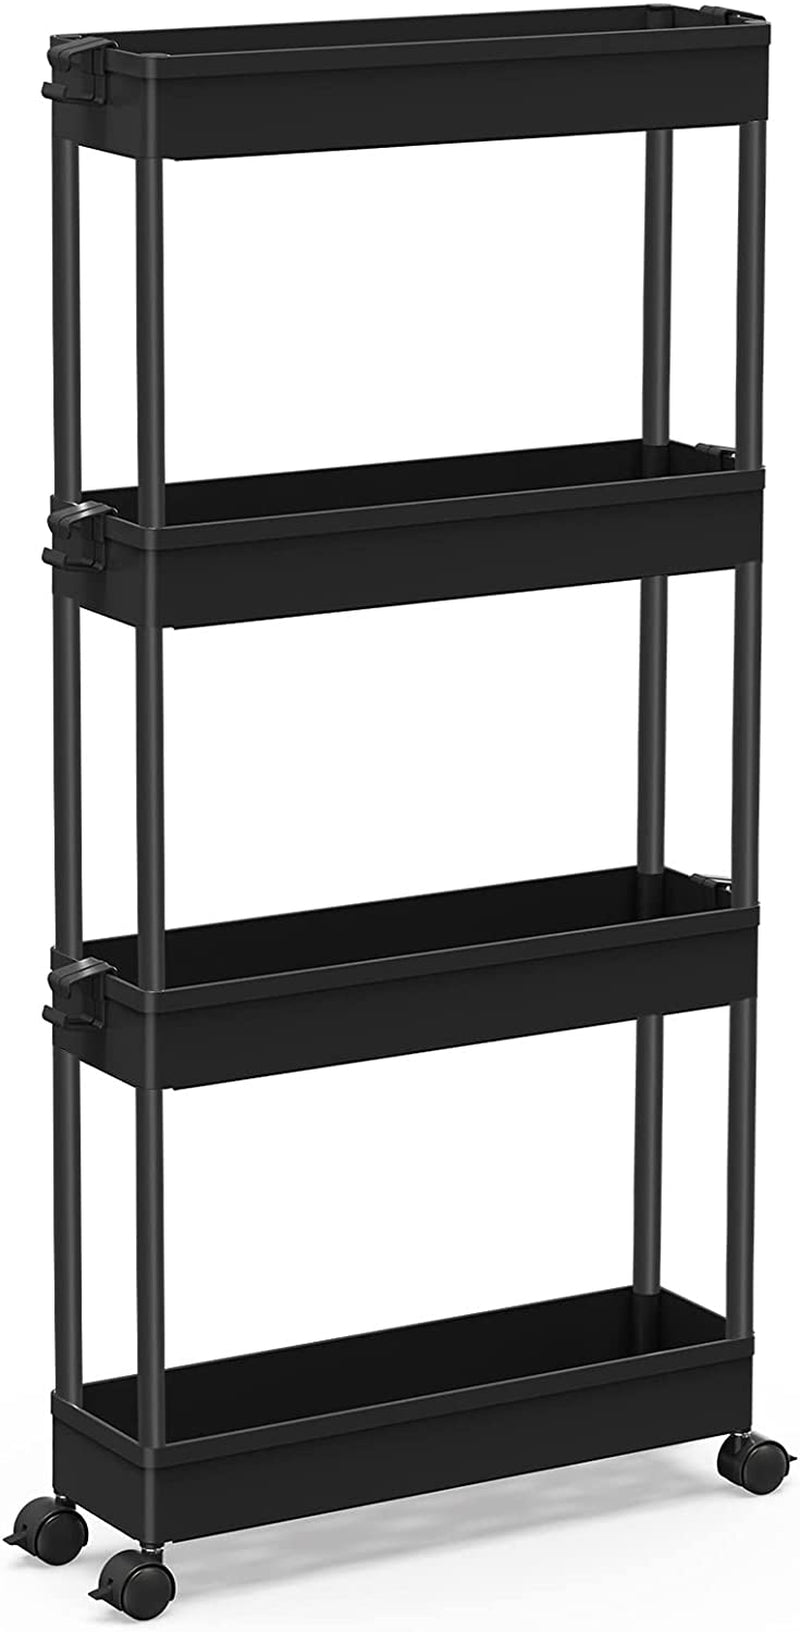 SPACEKEEPER Slim Rolling Storage Cart 4 Tier Bathroom Organizer Mobile Shelving Unit Storage Rolling Utility Cart Tower Rack for Kitchen Bathroom Laundry Narrow Places, White Home & Garden > Household Supplies > Storage & Organization SPACEKEEPER Black  